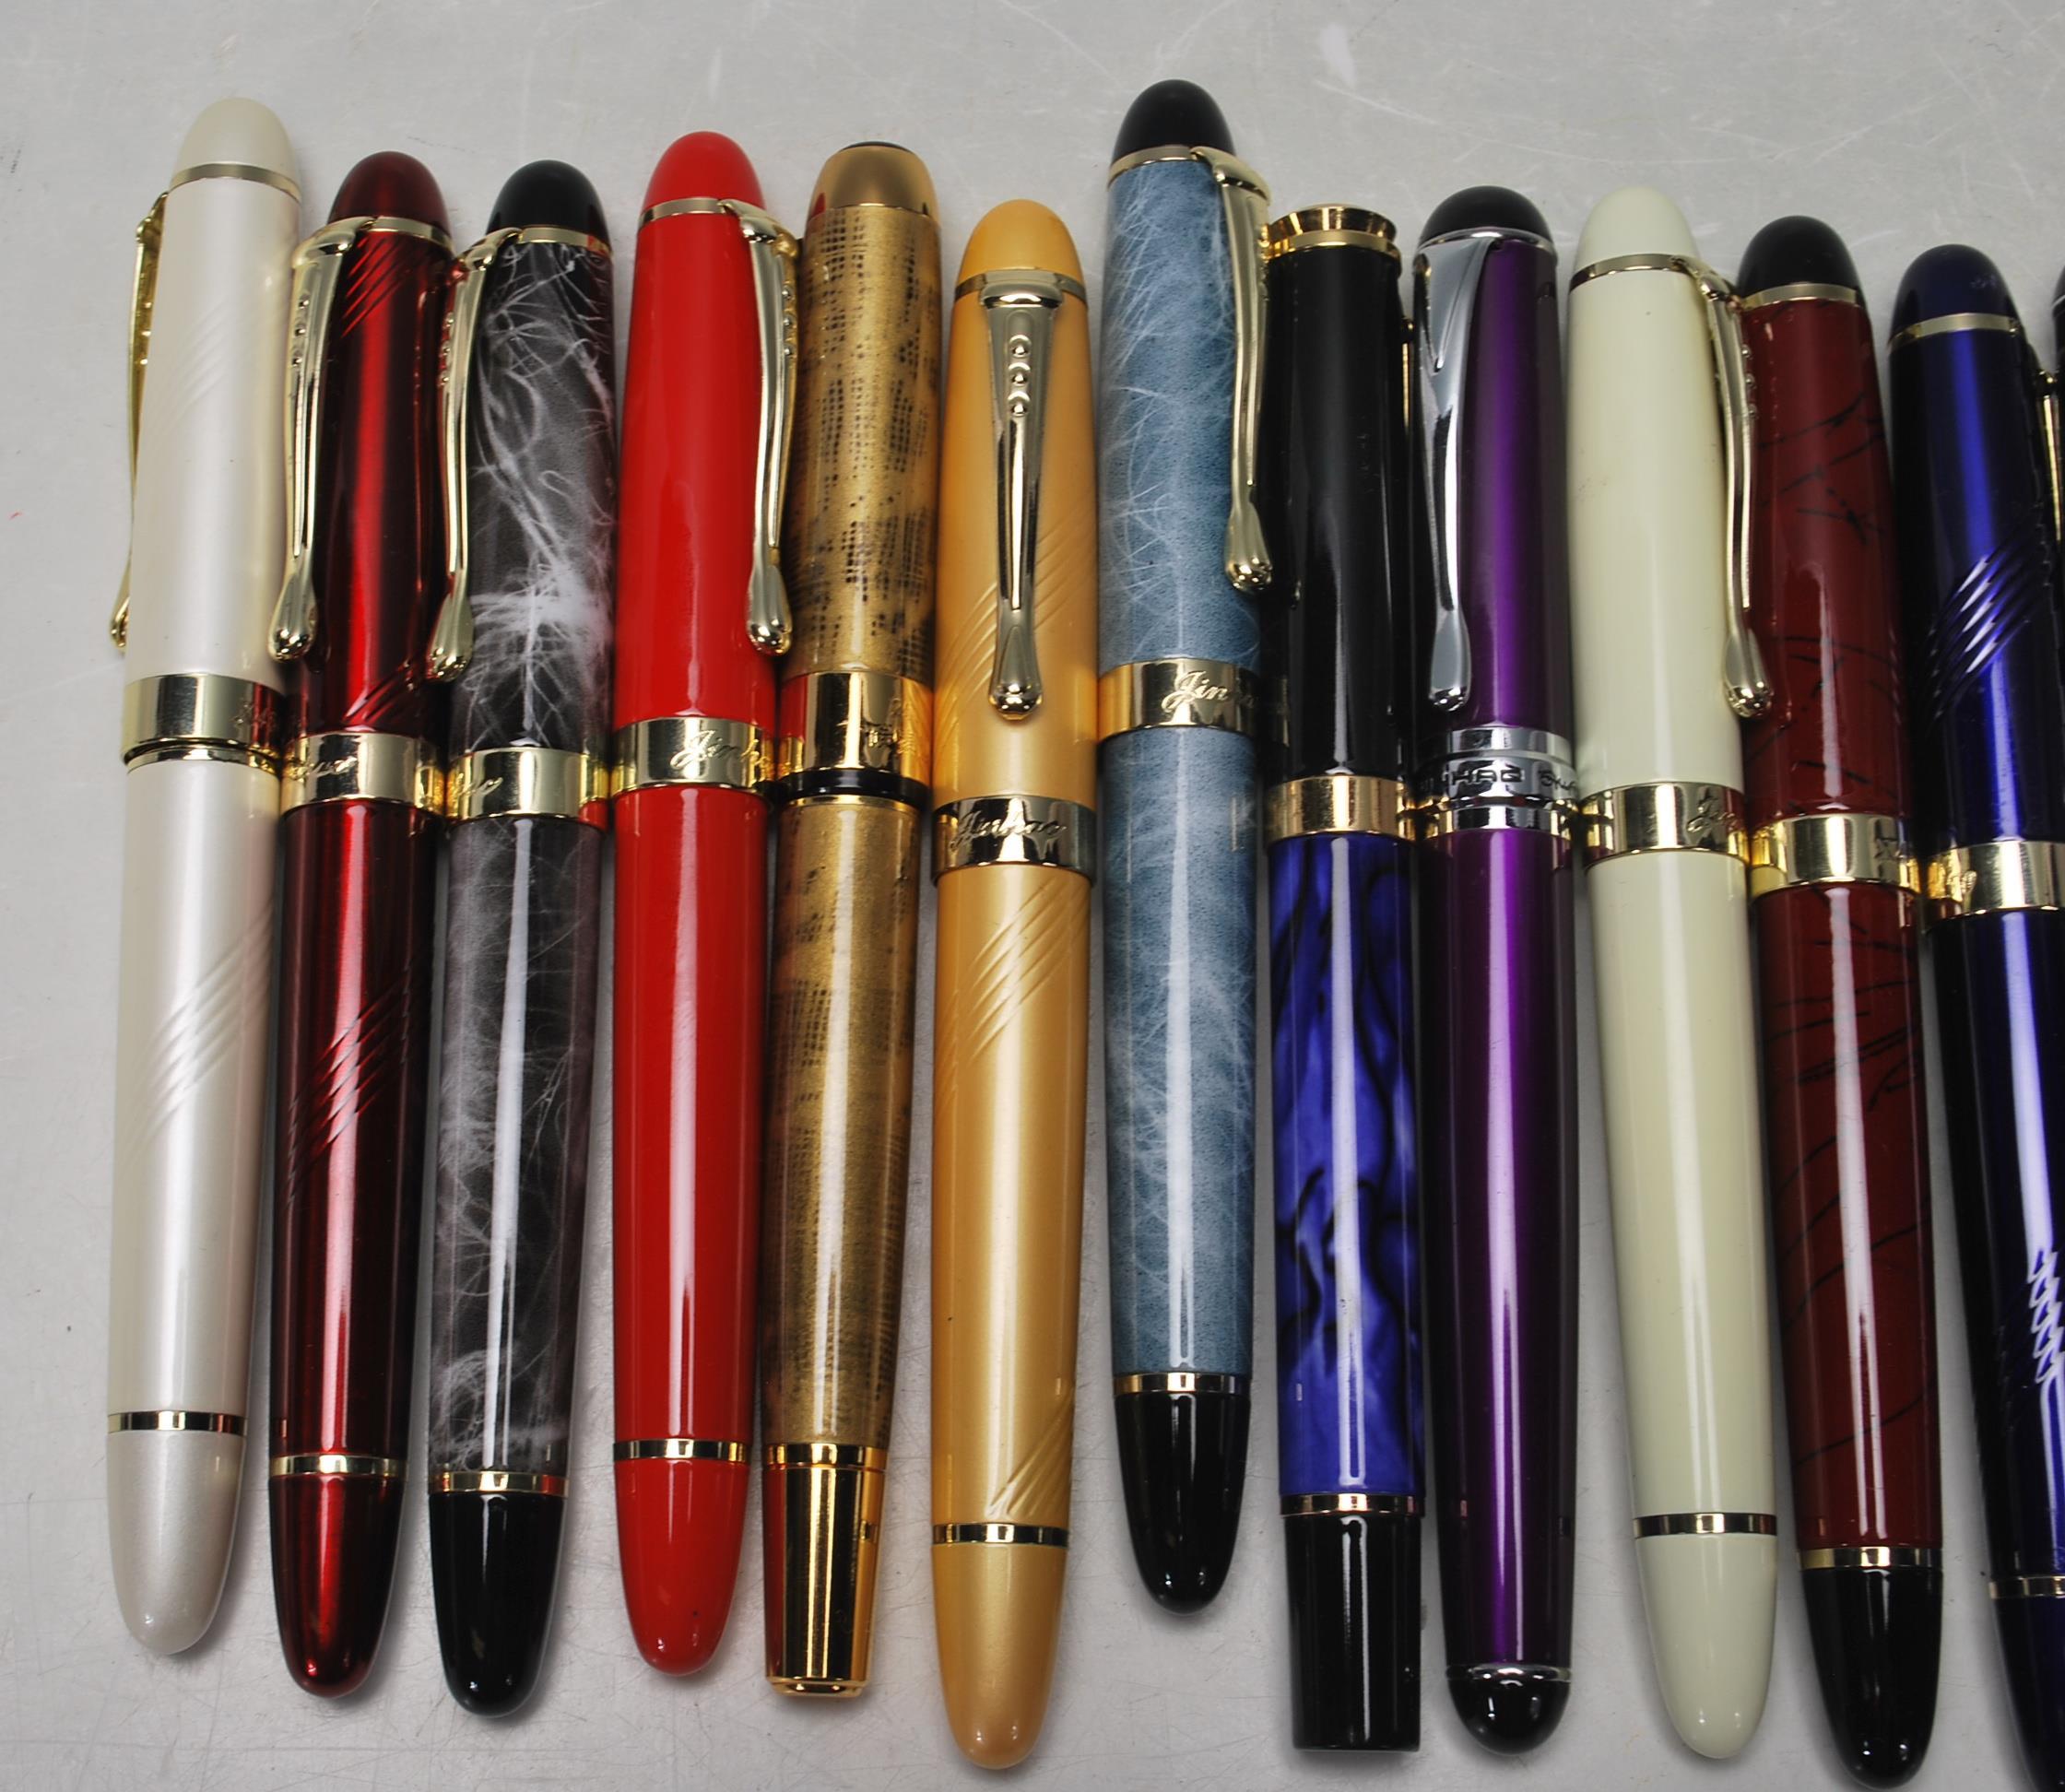 21 CHINESE JINHAO FOUNTAIN PENS - Image 4 of 9